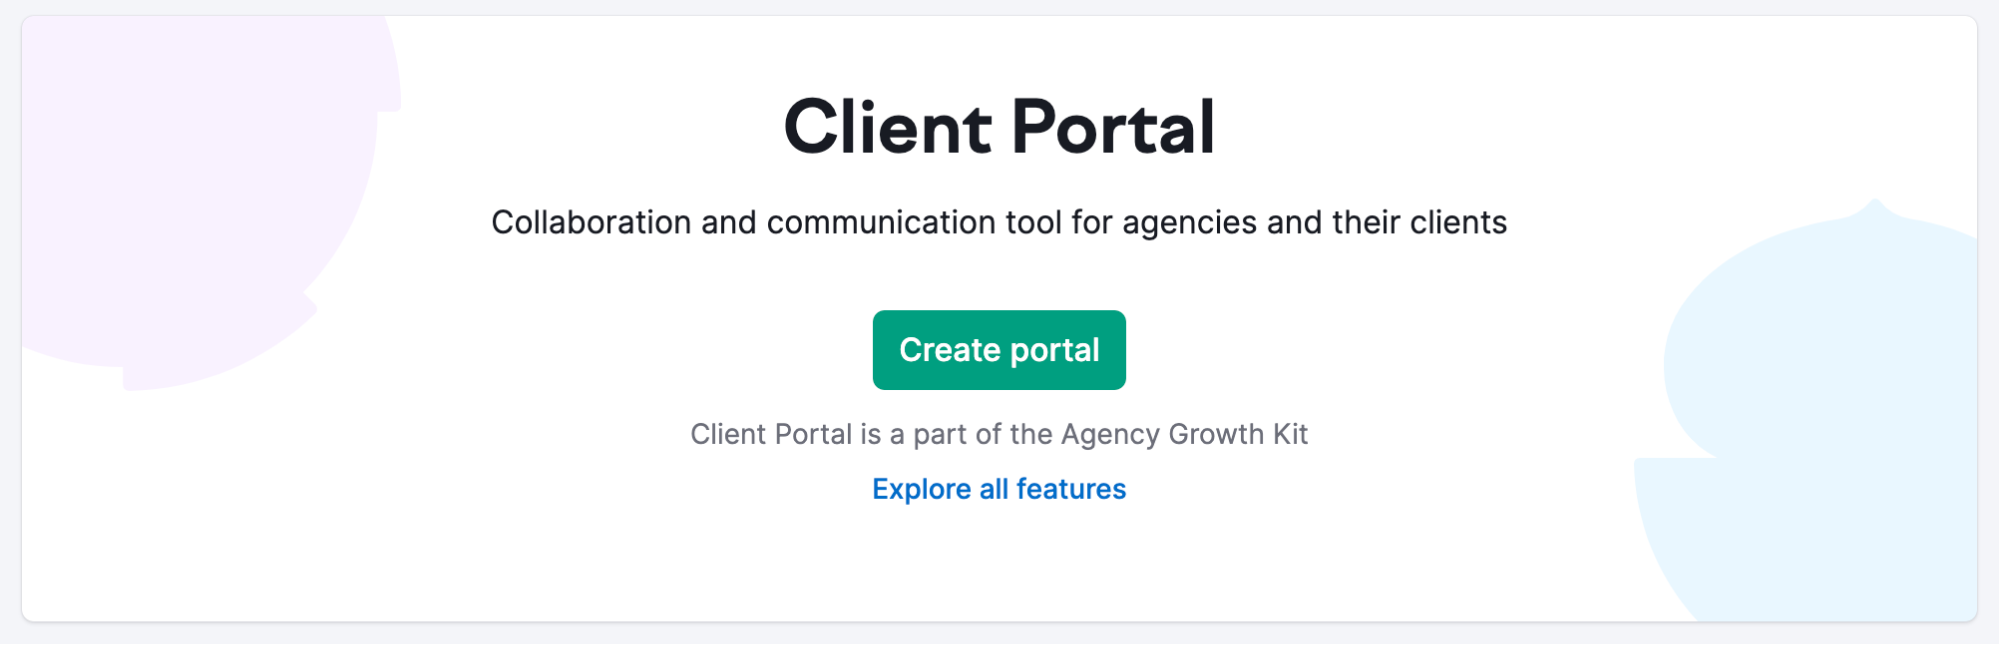 Landing page of the Client Portal tool with a button to create a new client portal